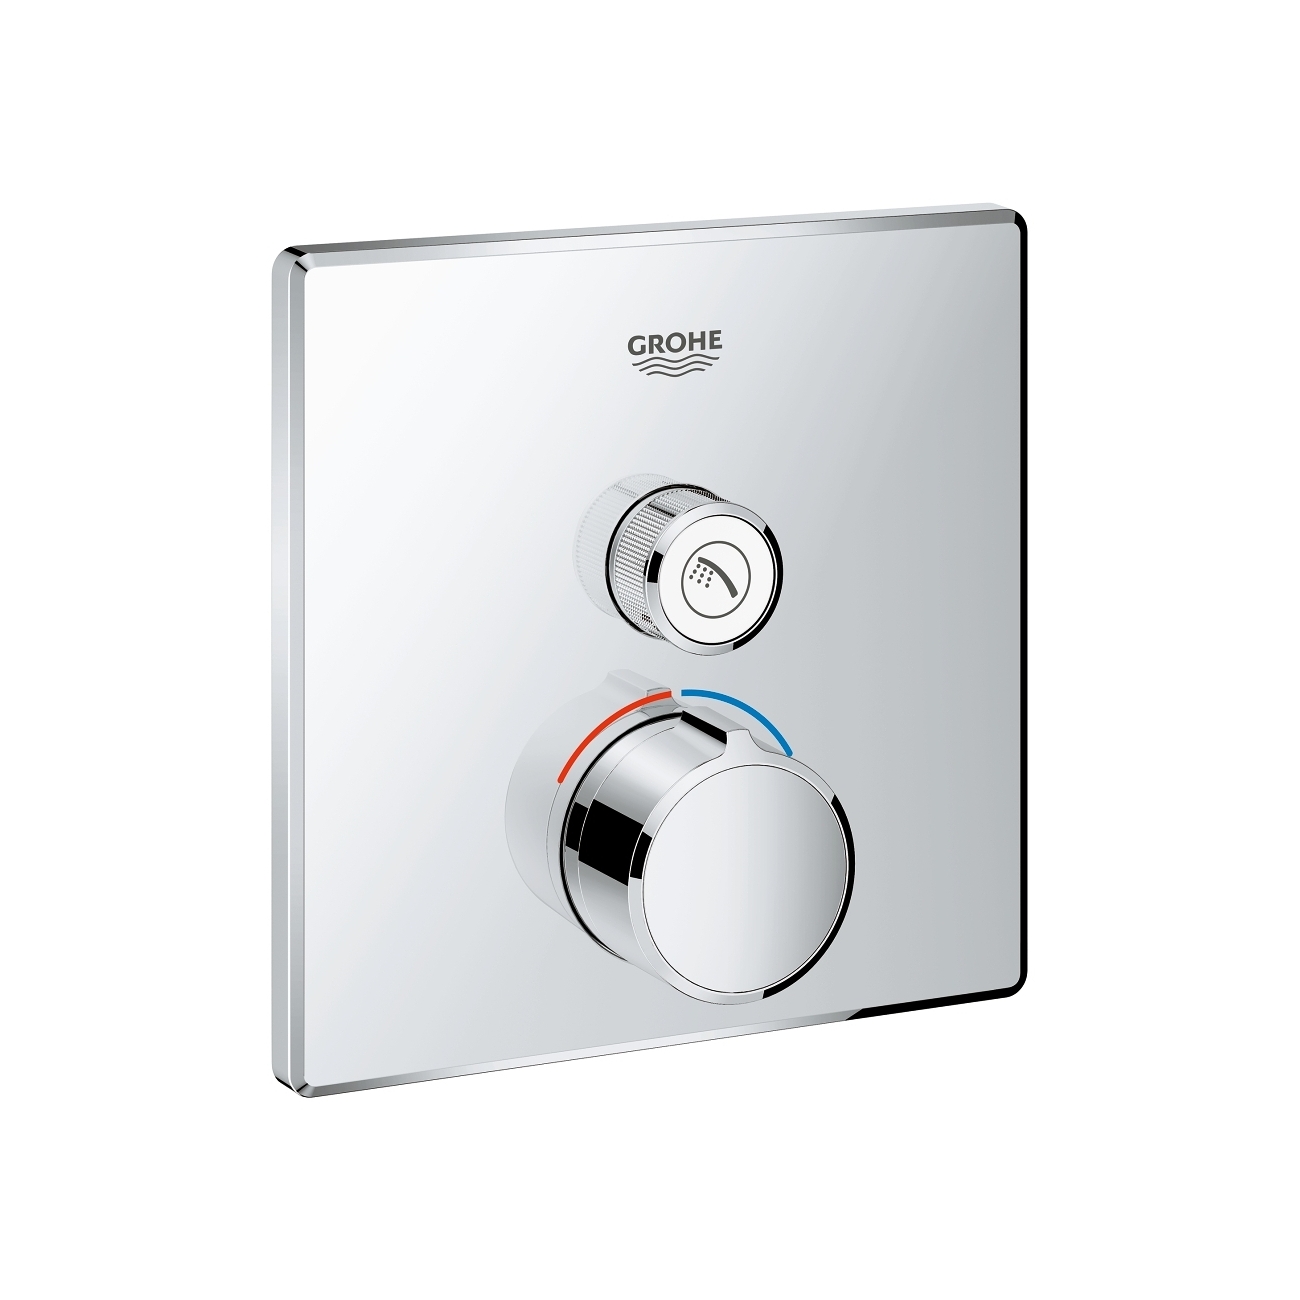 GROHE MIX SMARTCONTROL THERMOSTATIC SHOWER MIXER